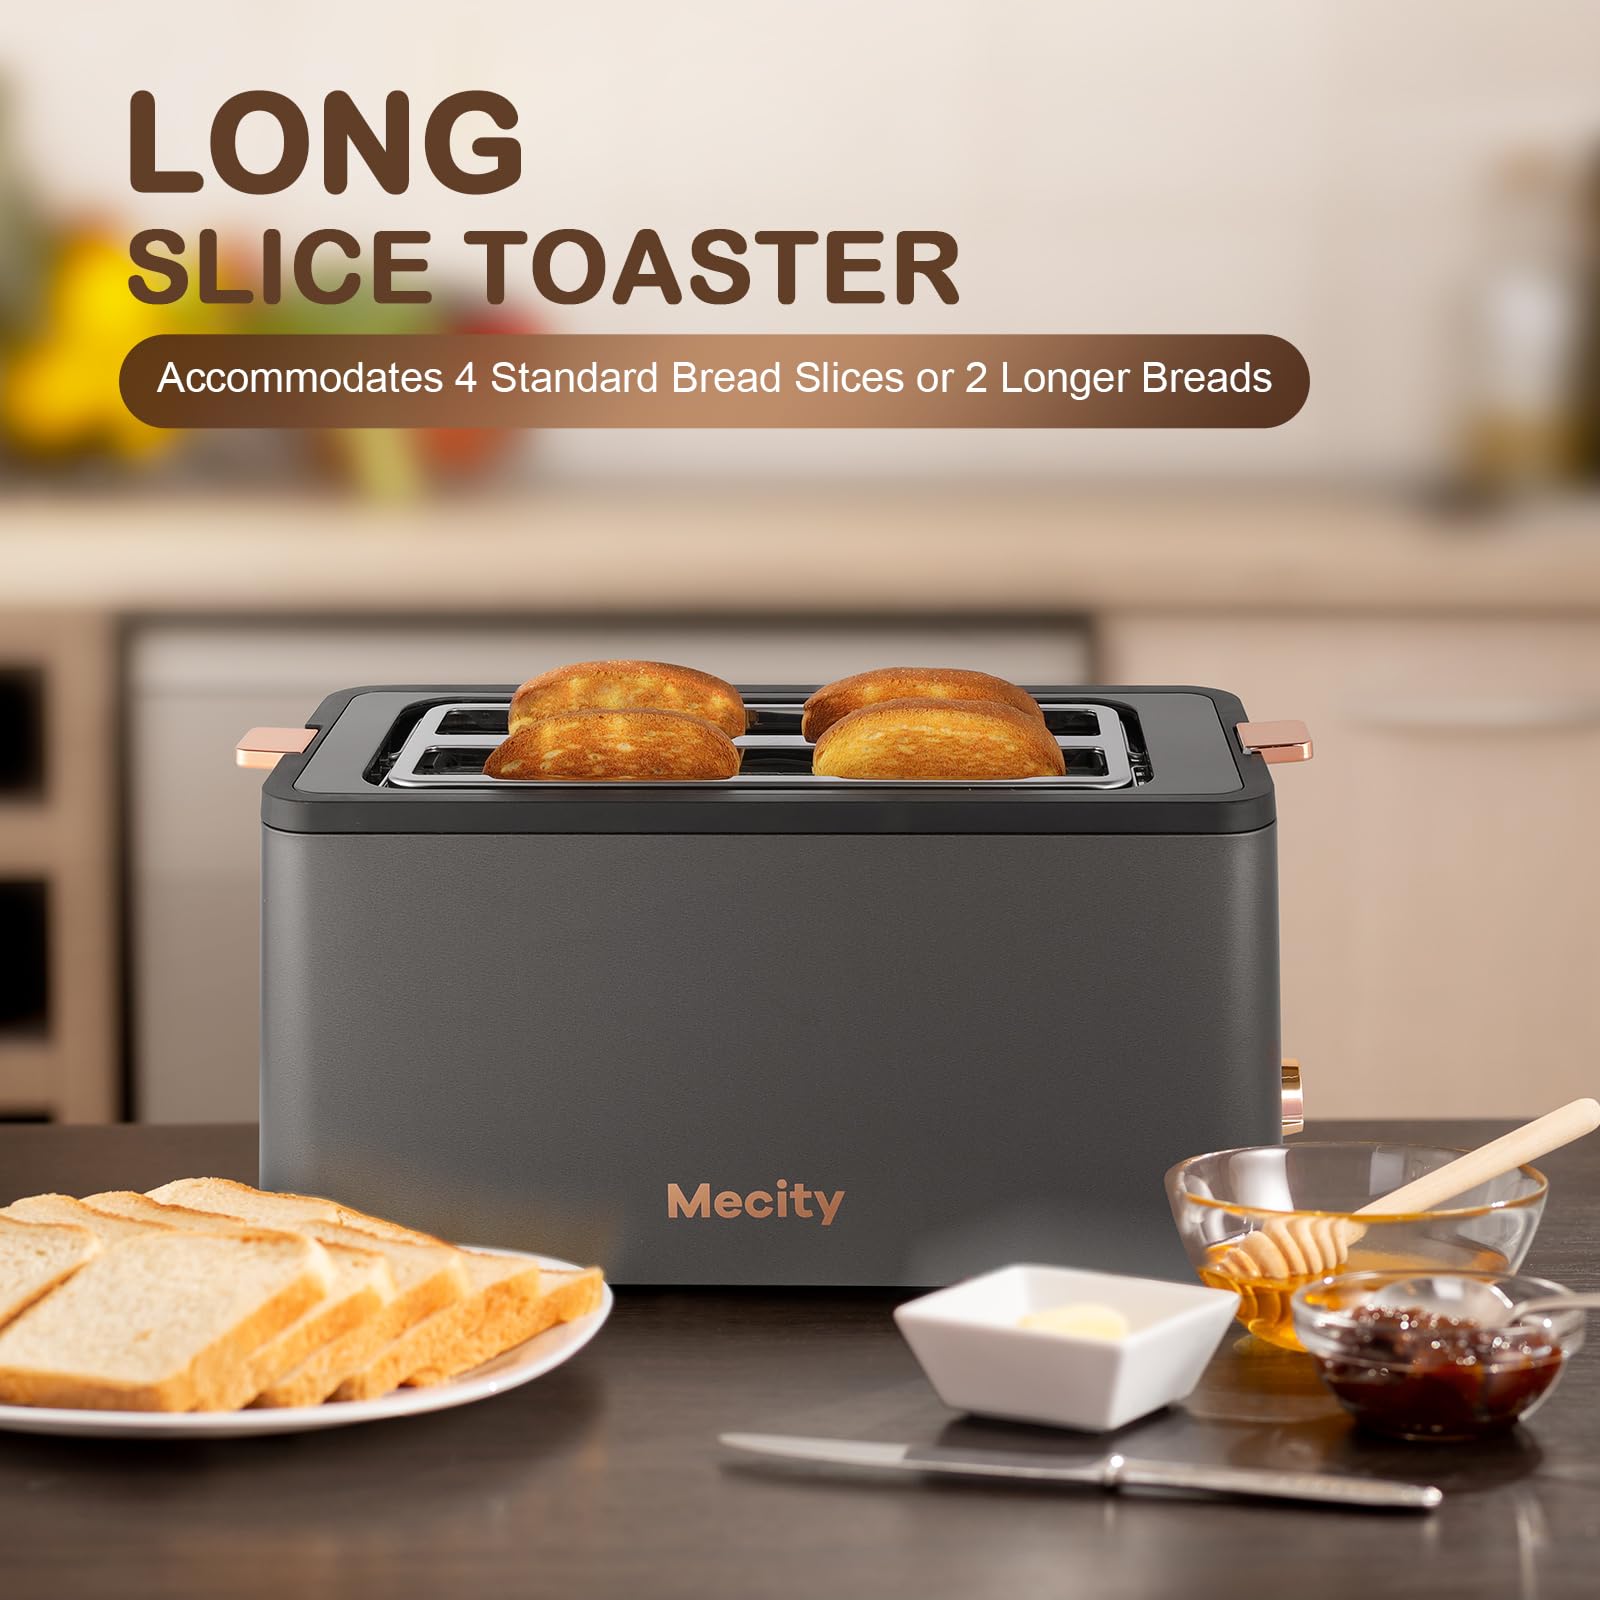 Mecity 4 Slice Toaster, Long Slot Toaster With Countdown Timer, Bagel / Defrost / Reheat / Cancel Functions,Warming Rack, removable Crumb Tray, 6 Browning Settings, Extra Wide Long Slots, Stainless Steel Bread Toaster, 1300 Watts， Grey & Golden